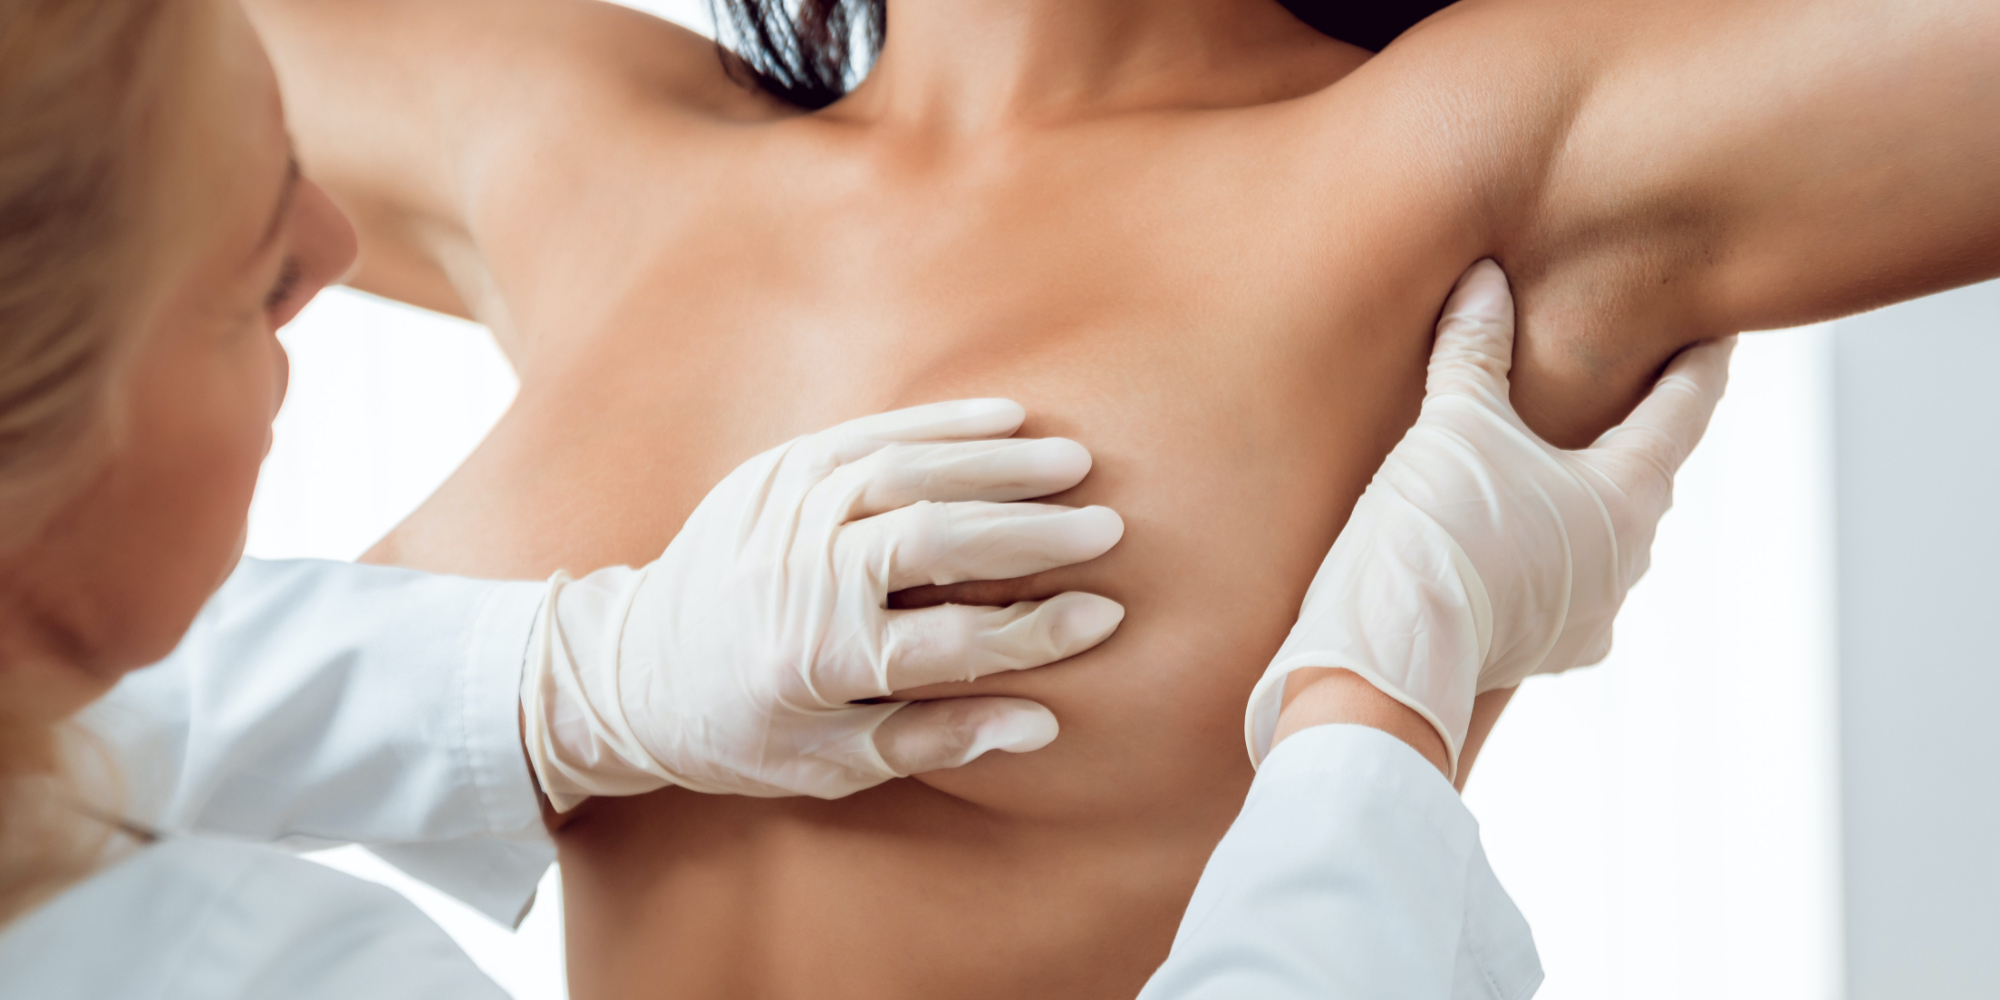 When to Consider Breast Implant Removal